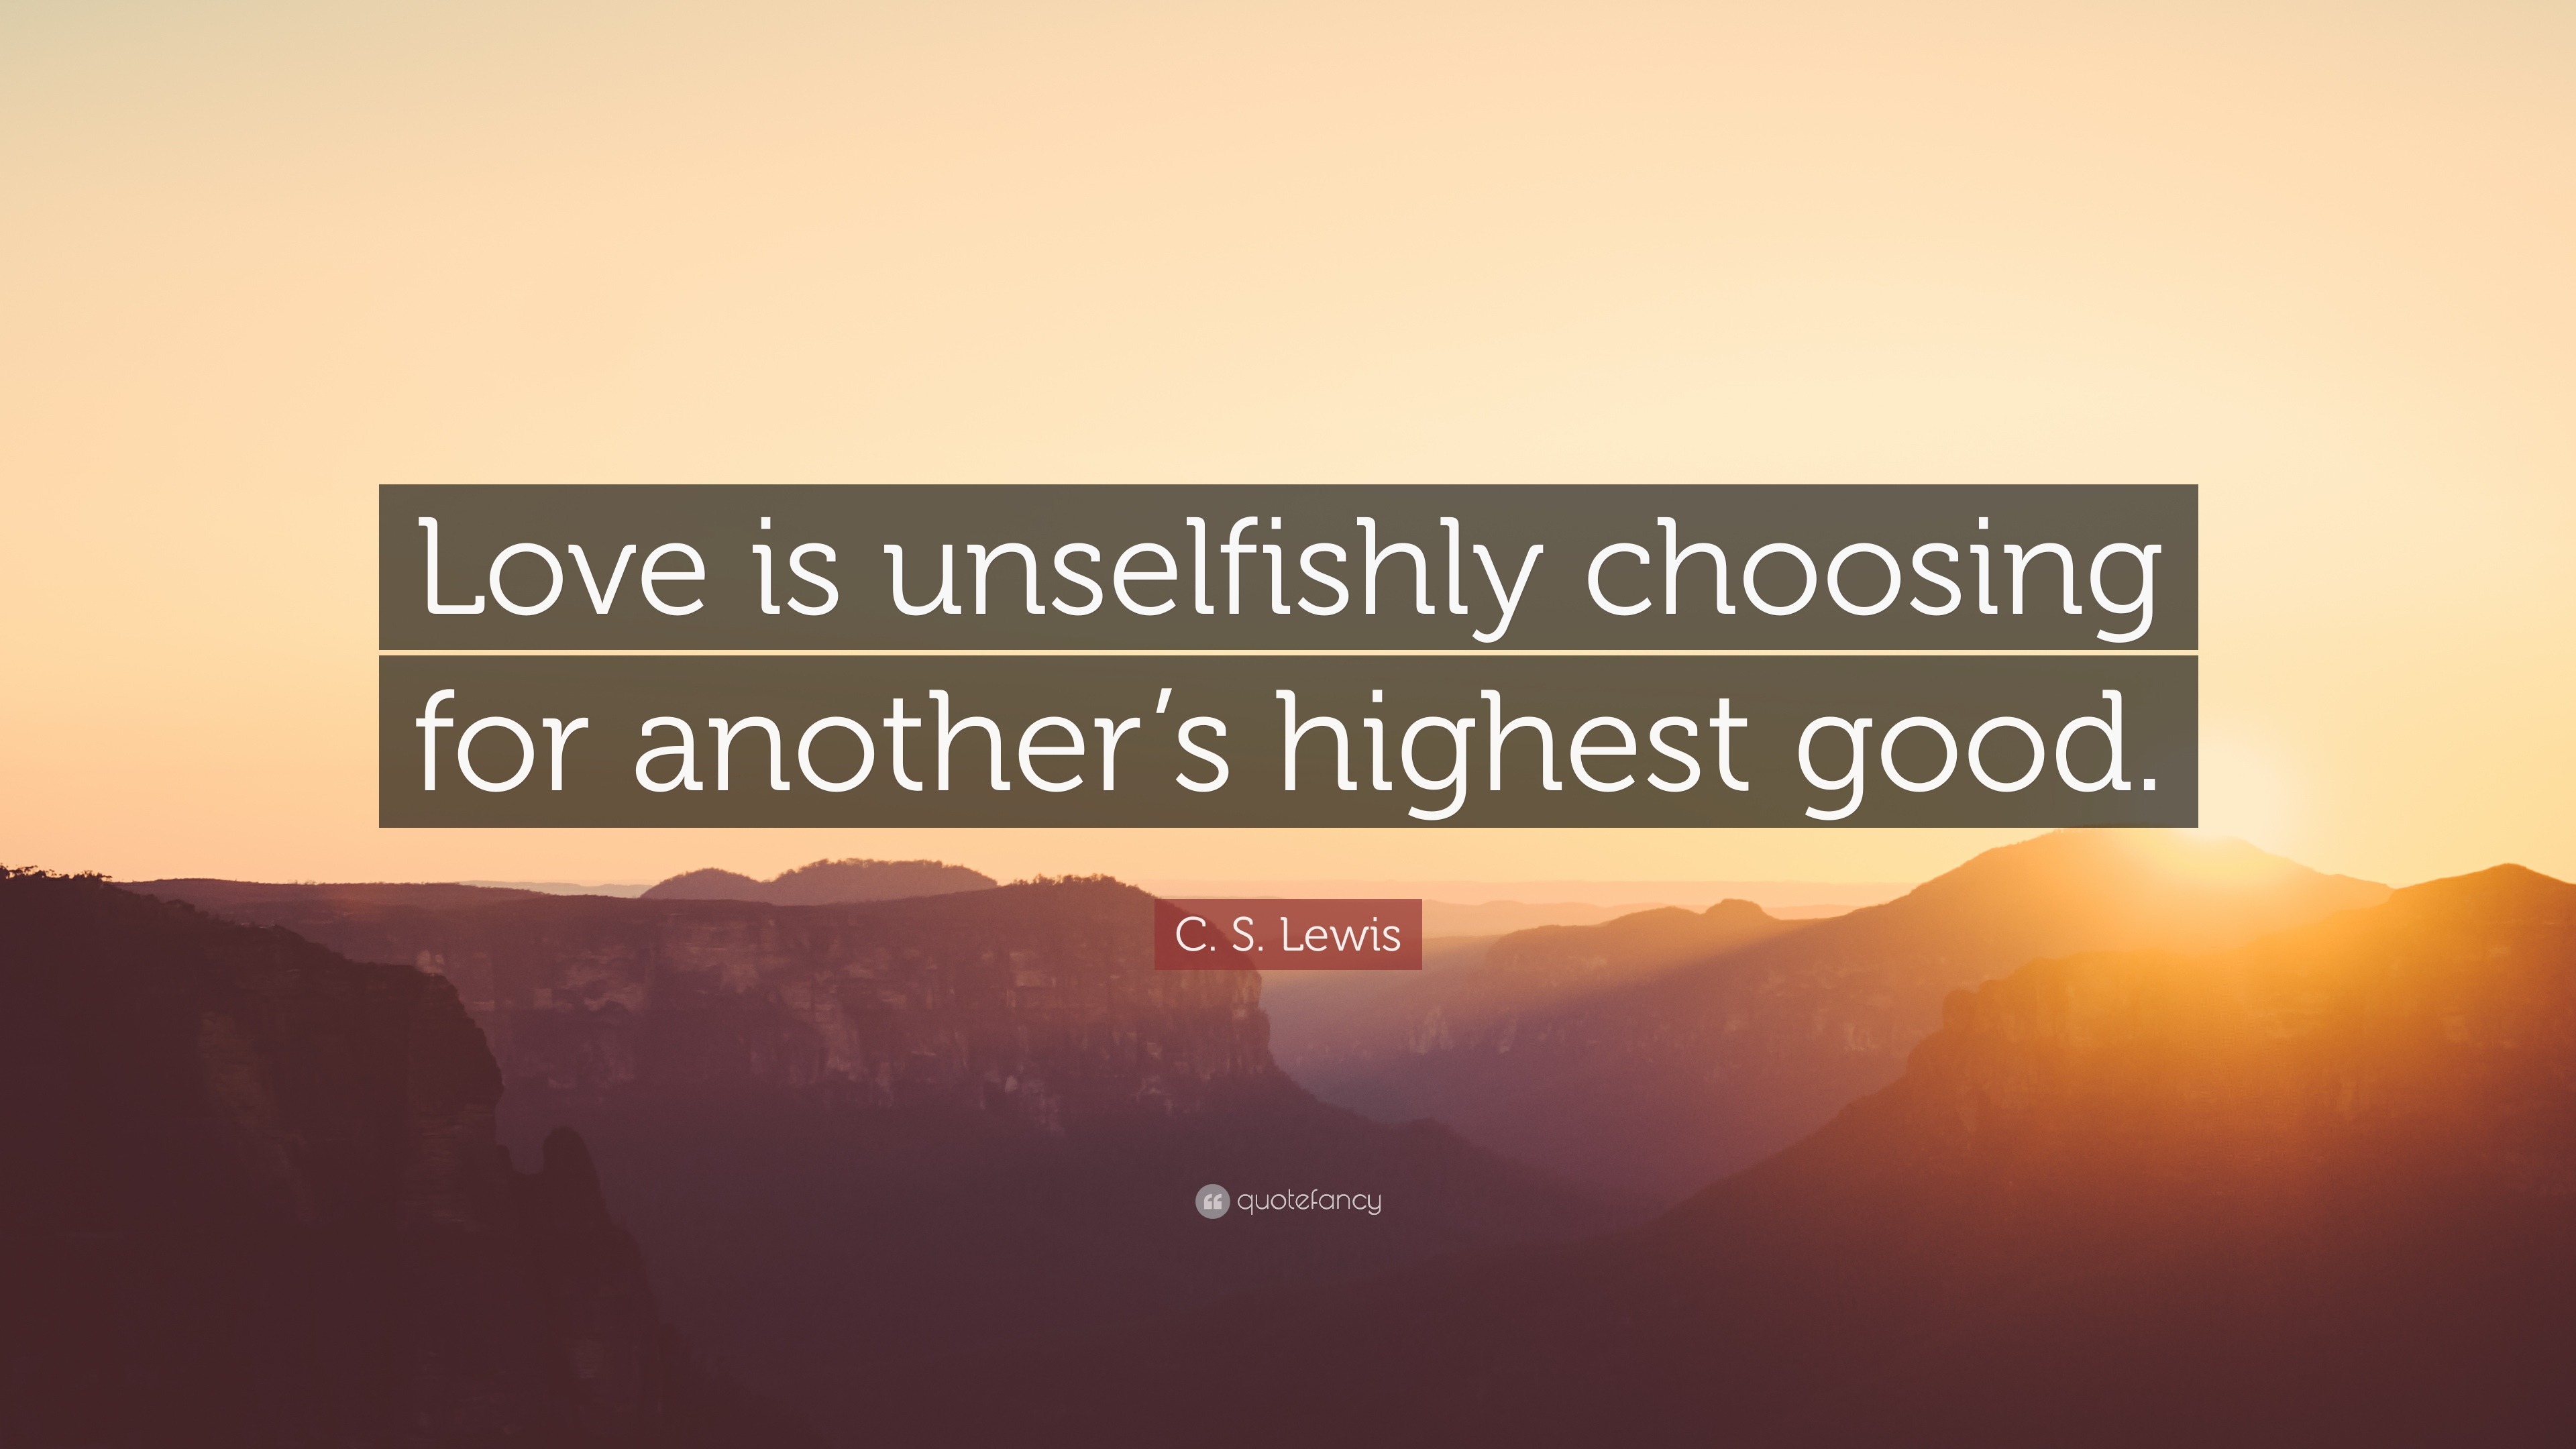 C. S. Lewis Quote: “Love is unselfishly choosing for another’s highest